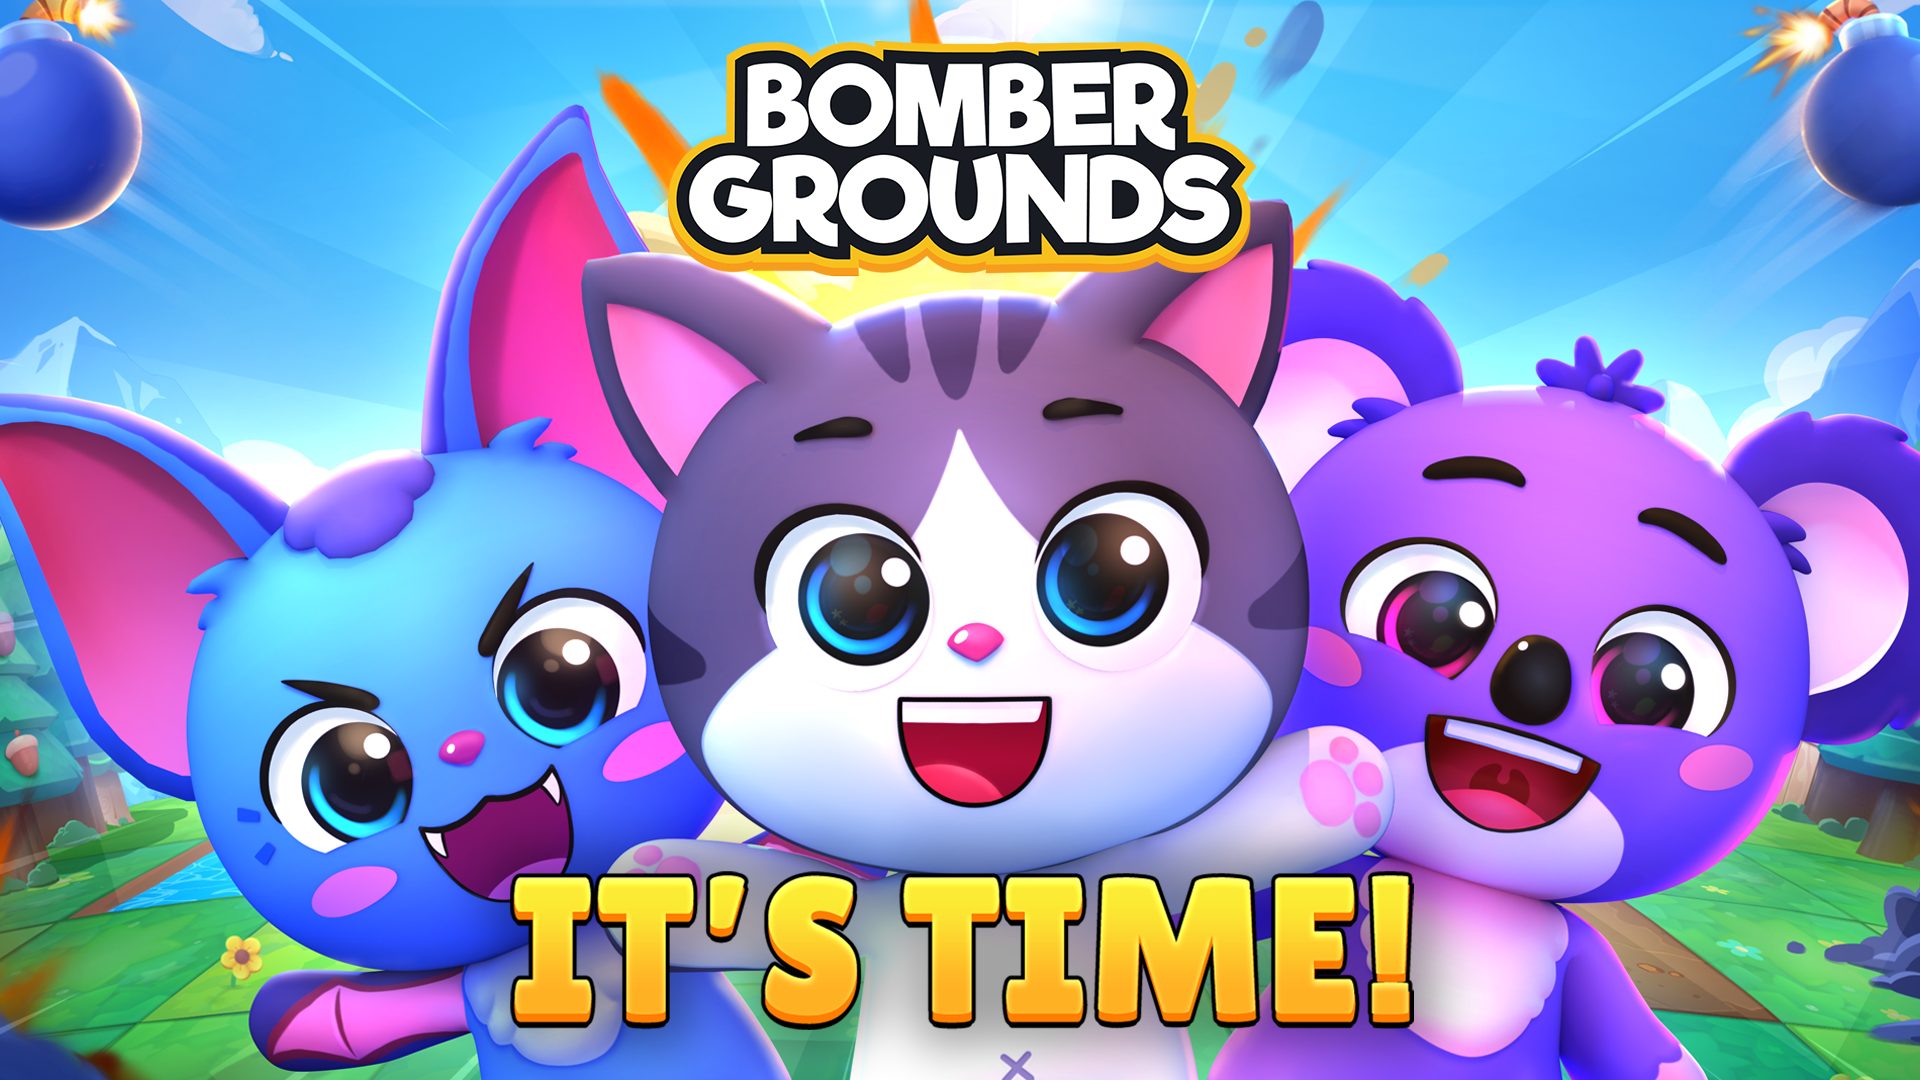 About: Bombergrounds: Reborn (iOS App Store version)